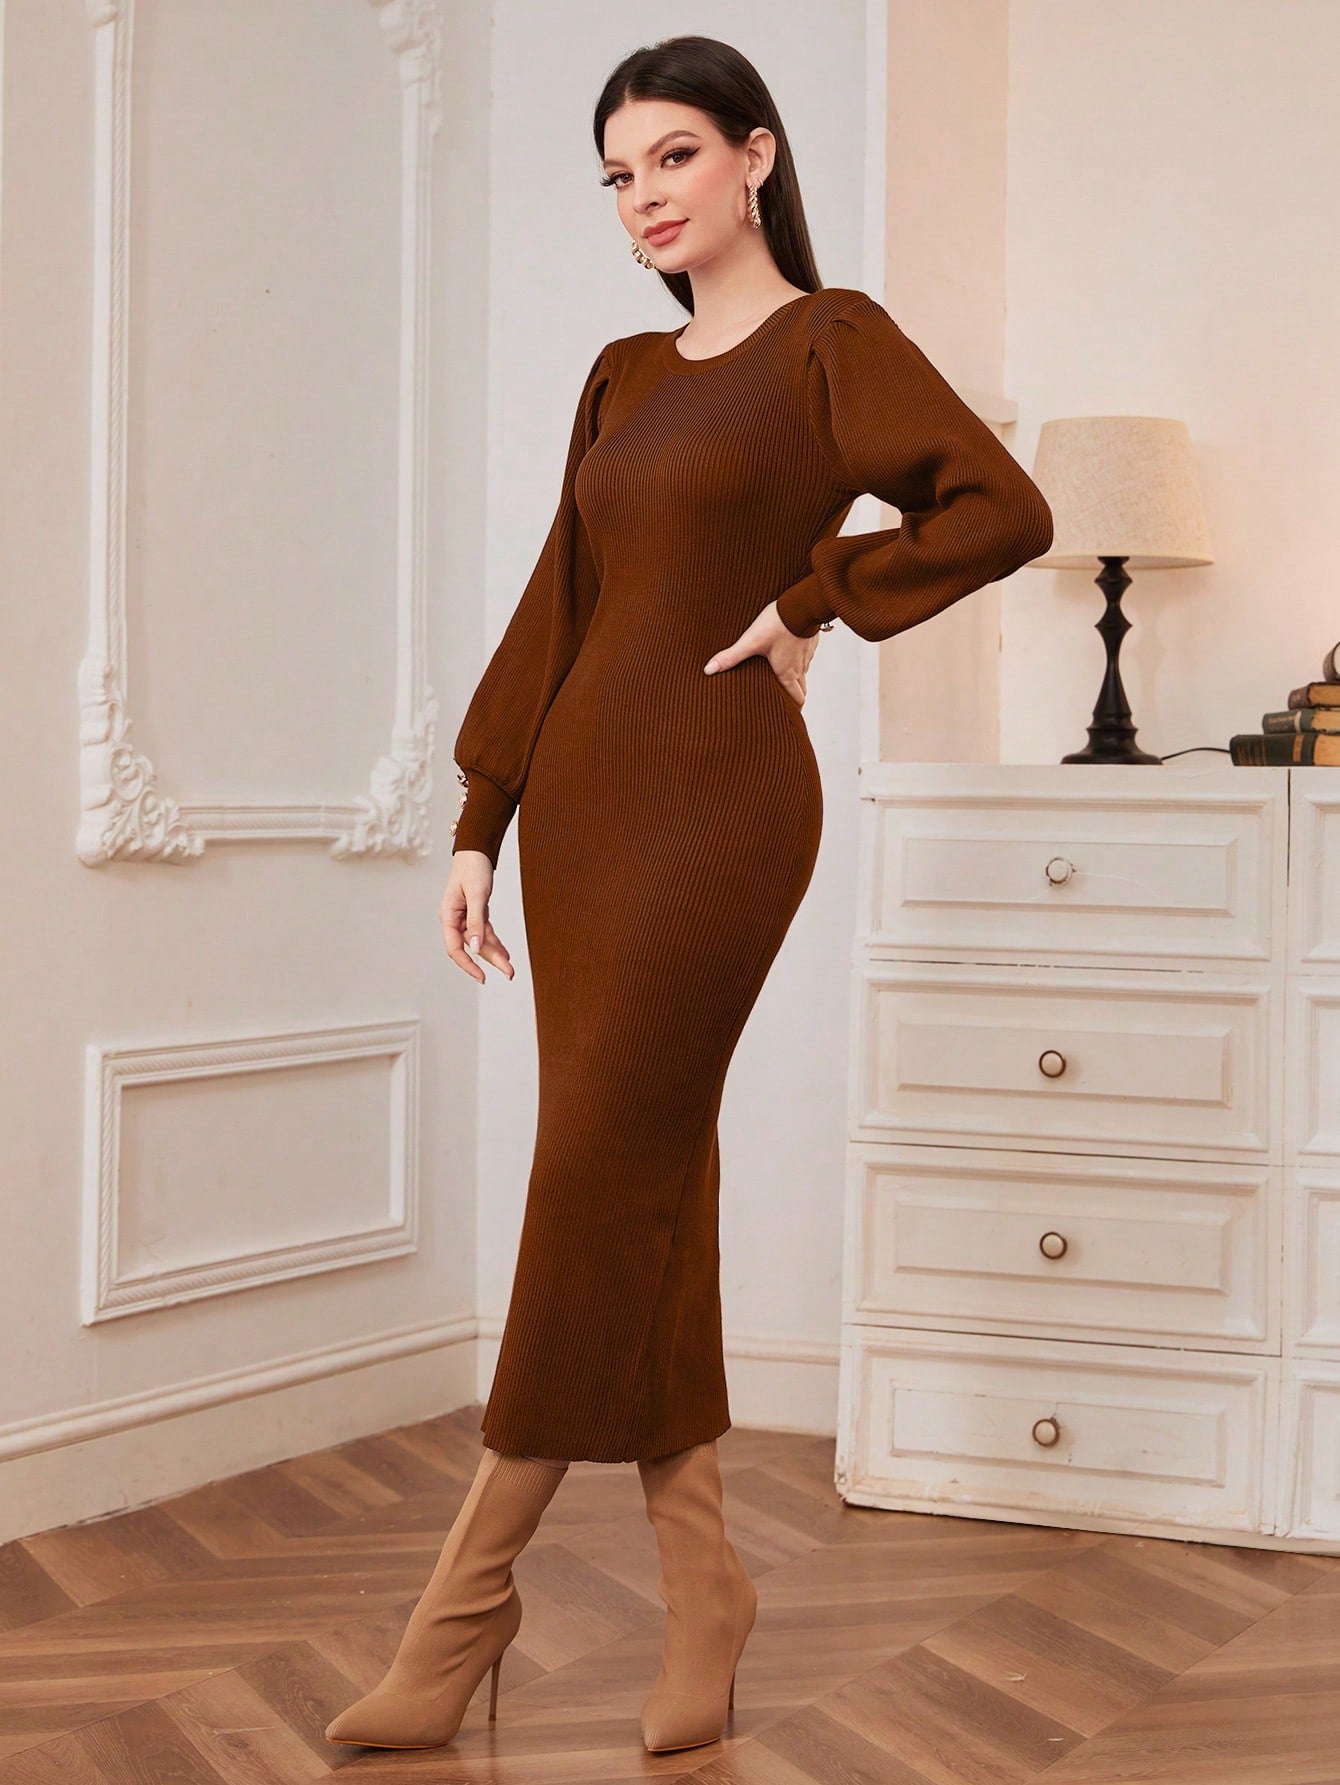 SHEIN Modely Solid Button Detail Lantern Sleeve Bodycon Sweater Dress